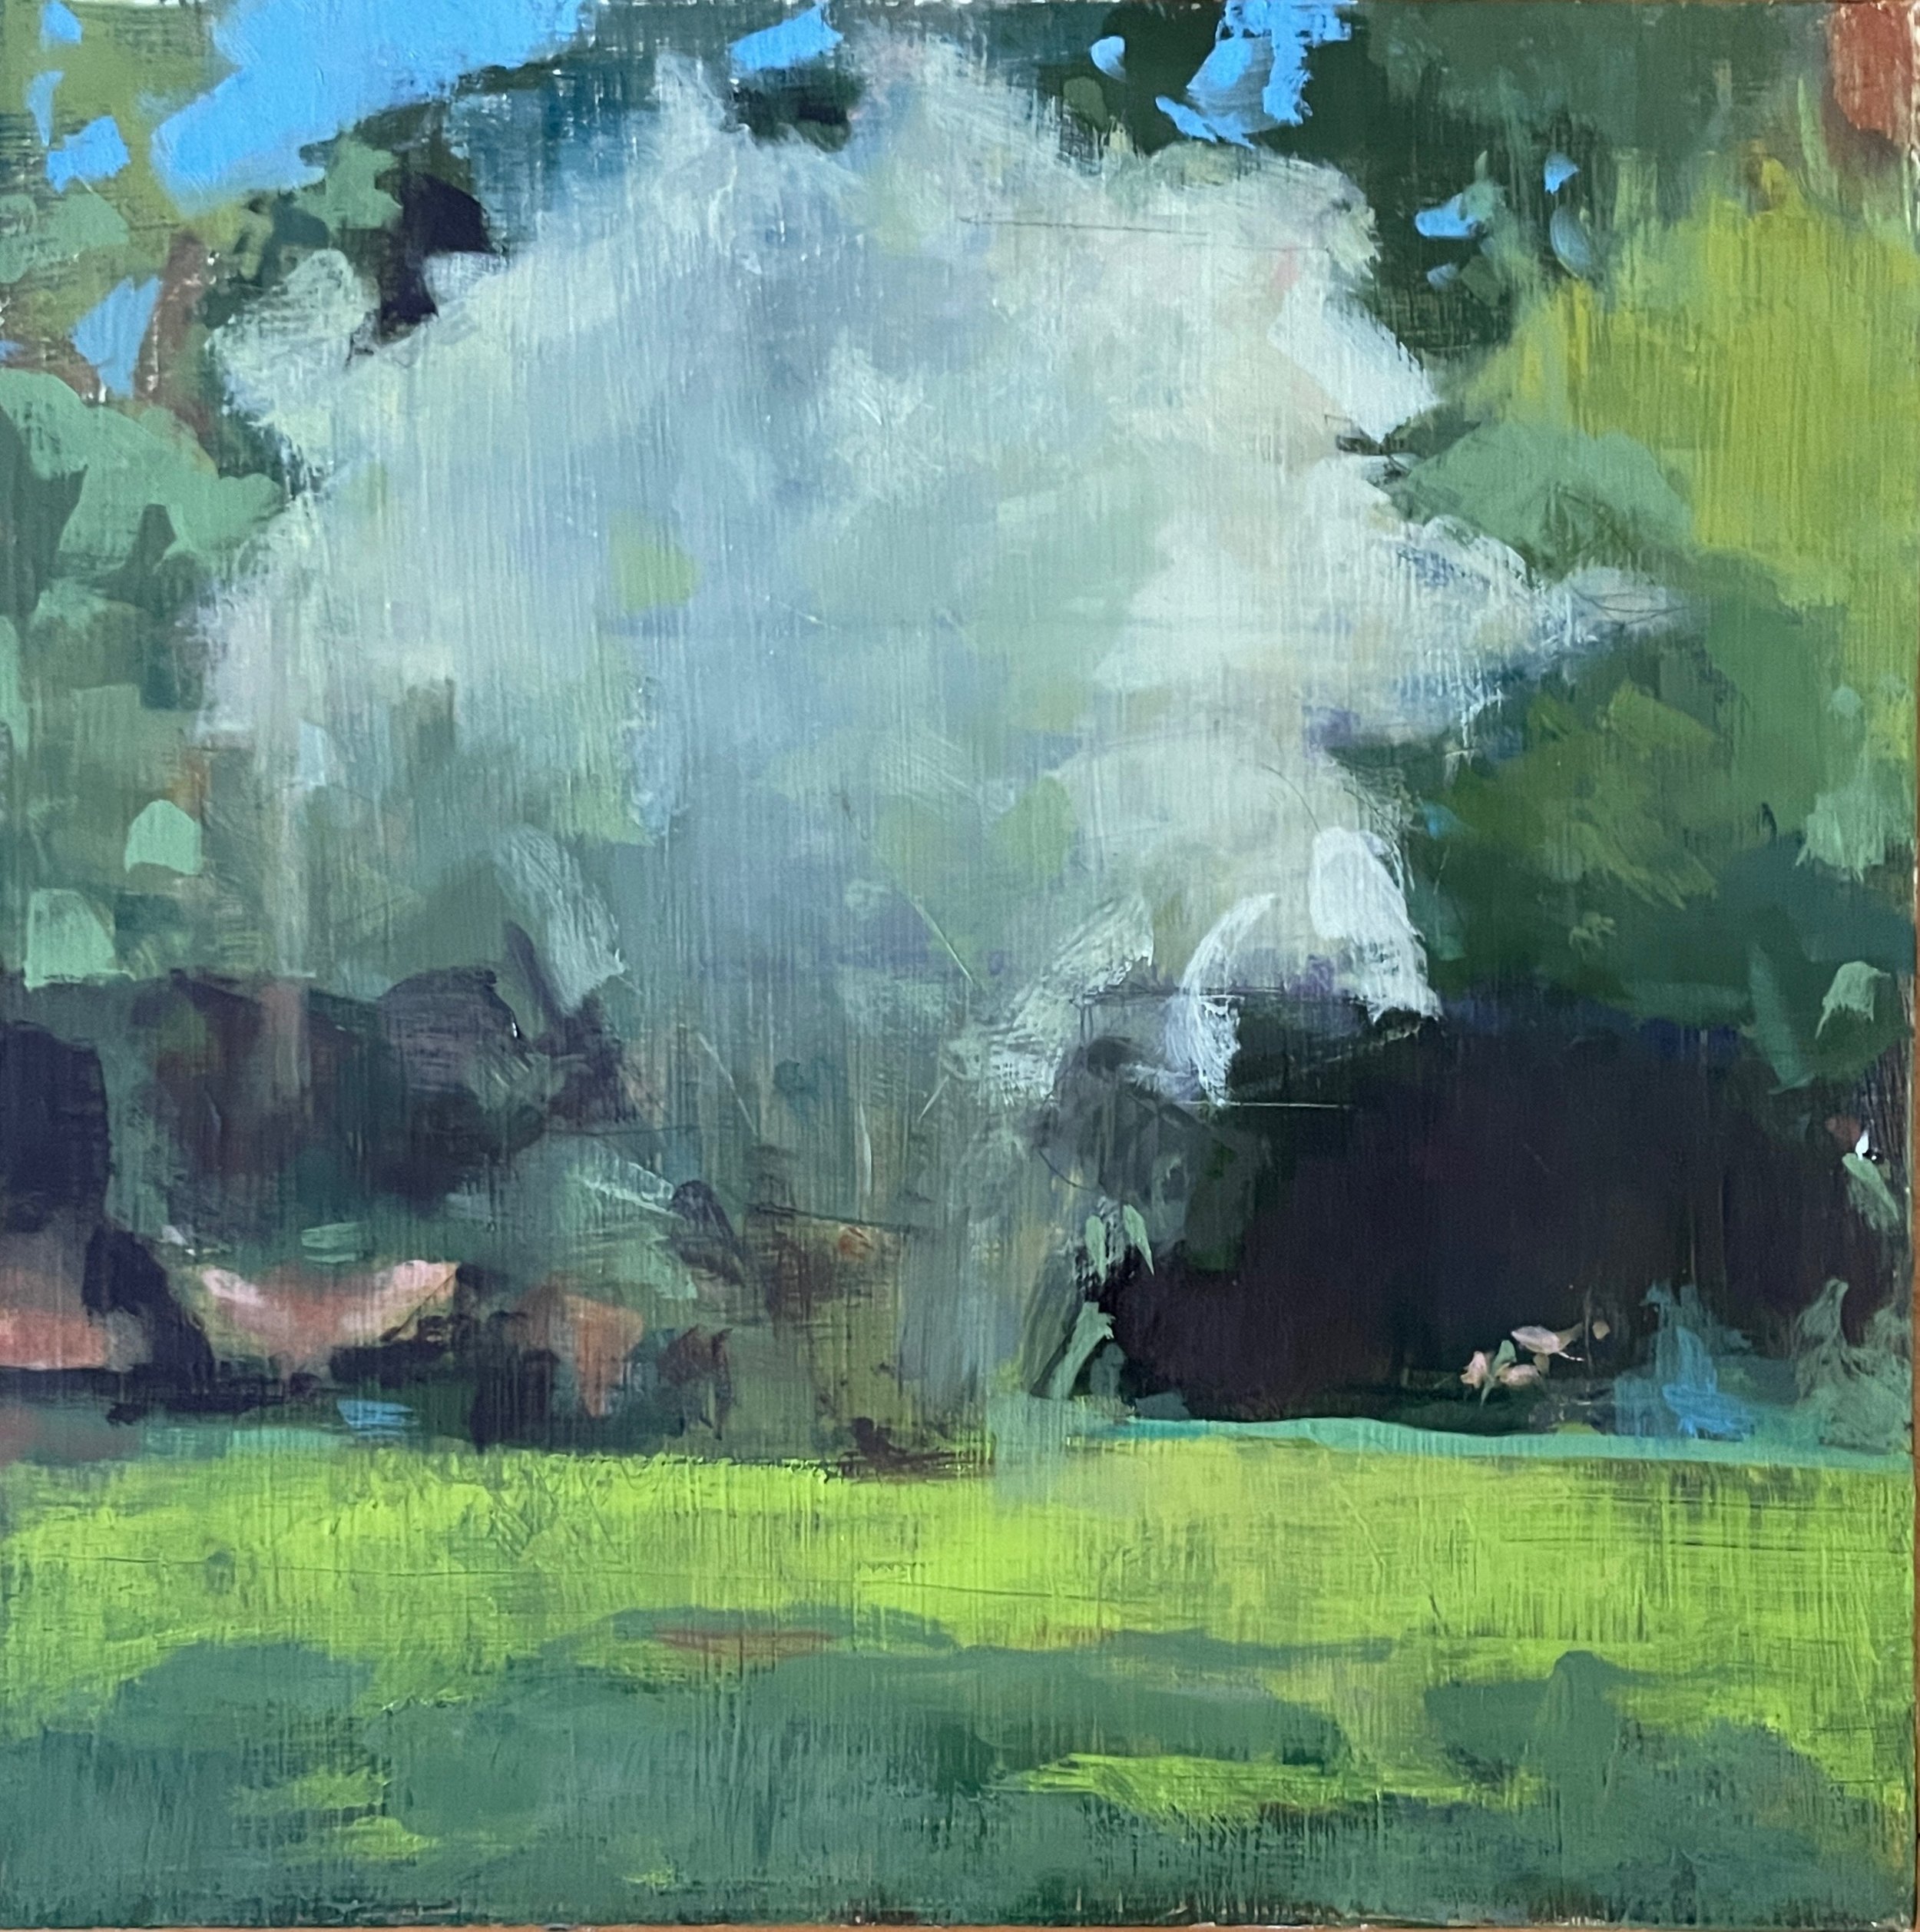  Willow, early summer  oil on board  8” x 8” 